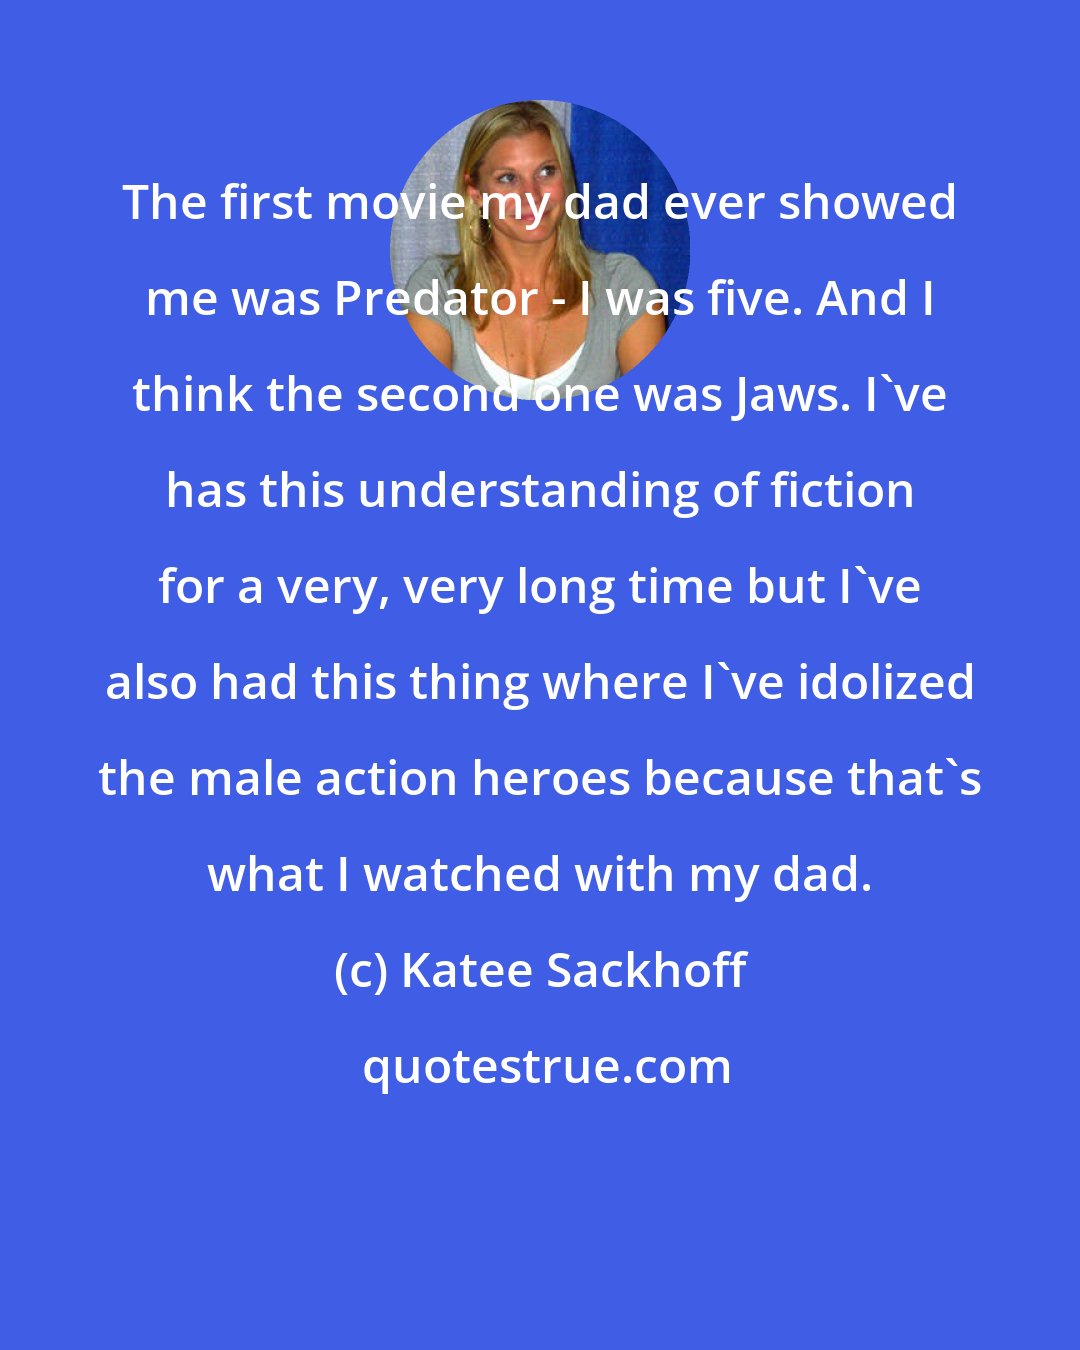 Katee Sackhoff: The first movie my dad ever showed me was Predator - I was five. And I think the second one was Jaws. I've has this understanding of fiction for a very, very long time but I've also had this thing where I've idolized the male action heroes because that's what I watched with my dad.